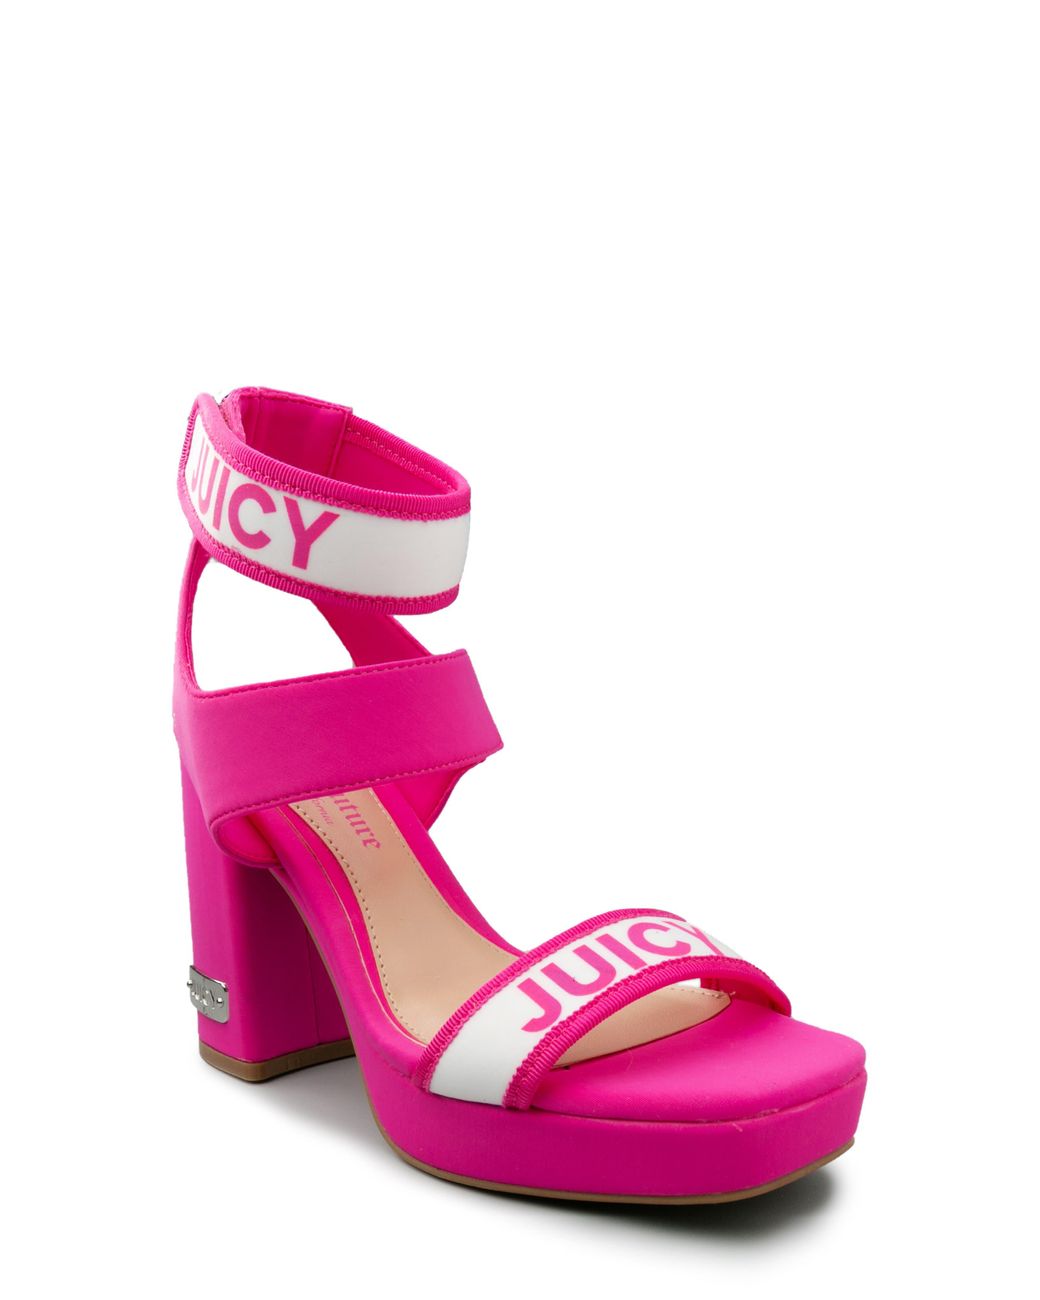 Juicy Couture Glisten Heeled Sandal In P-fuschia/wht Neopre At Nordstrom  Rack in Pink | Lyst